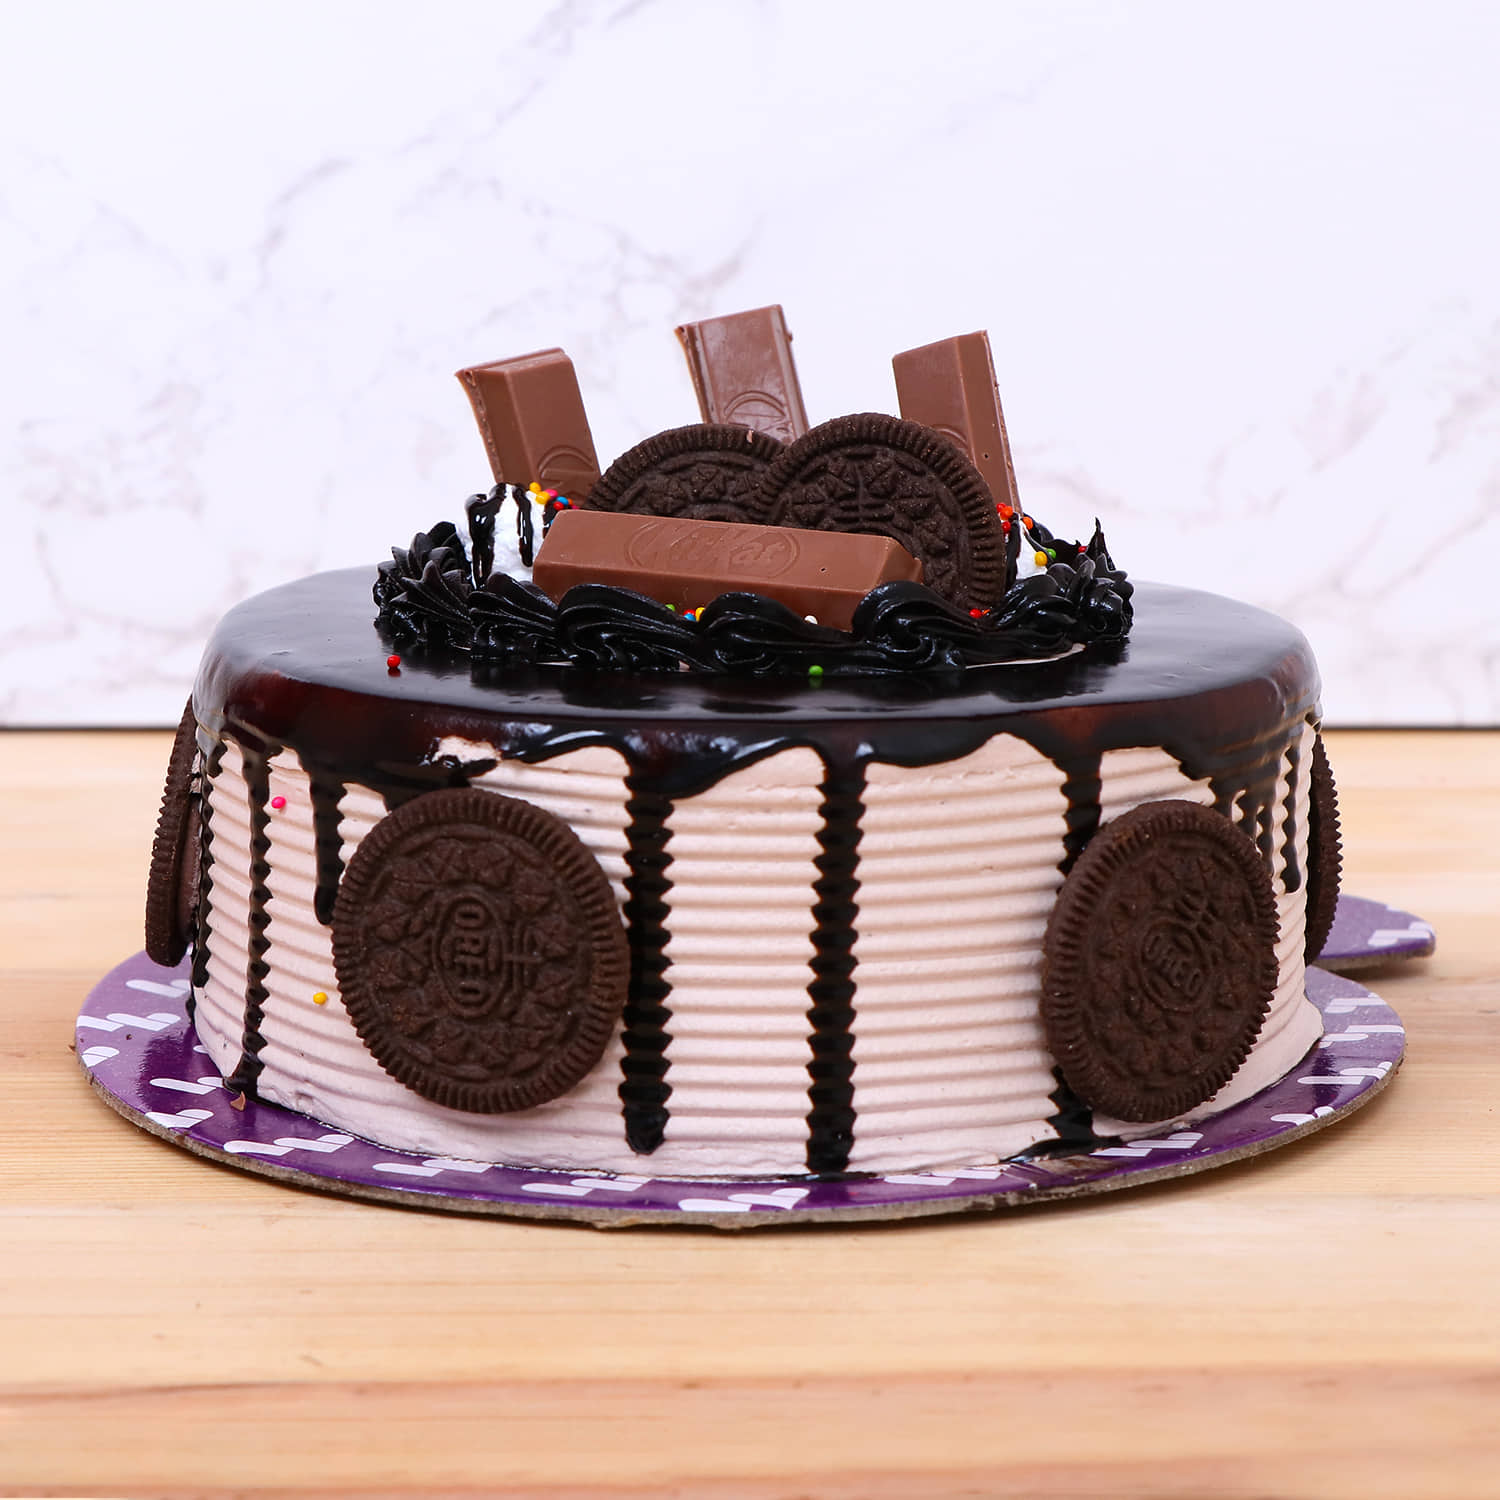 Kit Kat Oreo Cake is a heavenly treat for all chocolate lovers